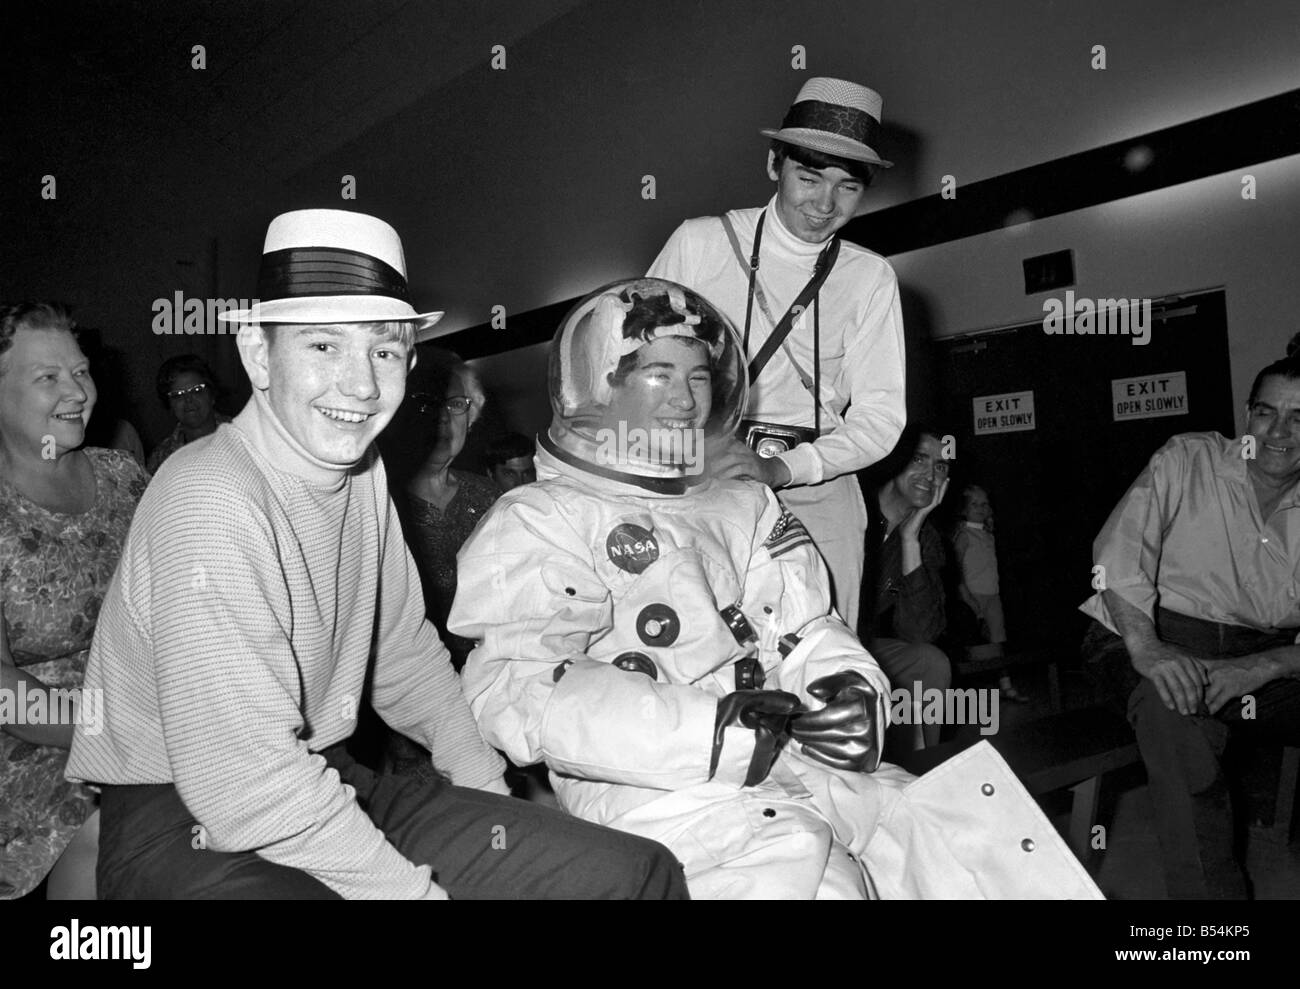 Visitors at NASA Space Station in Florida, U.S.A a few hours before Apollo 12 blasted off on a mission to the moon. A young boy Stock Photo